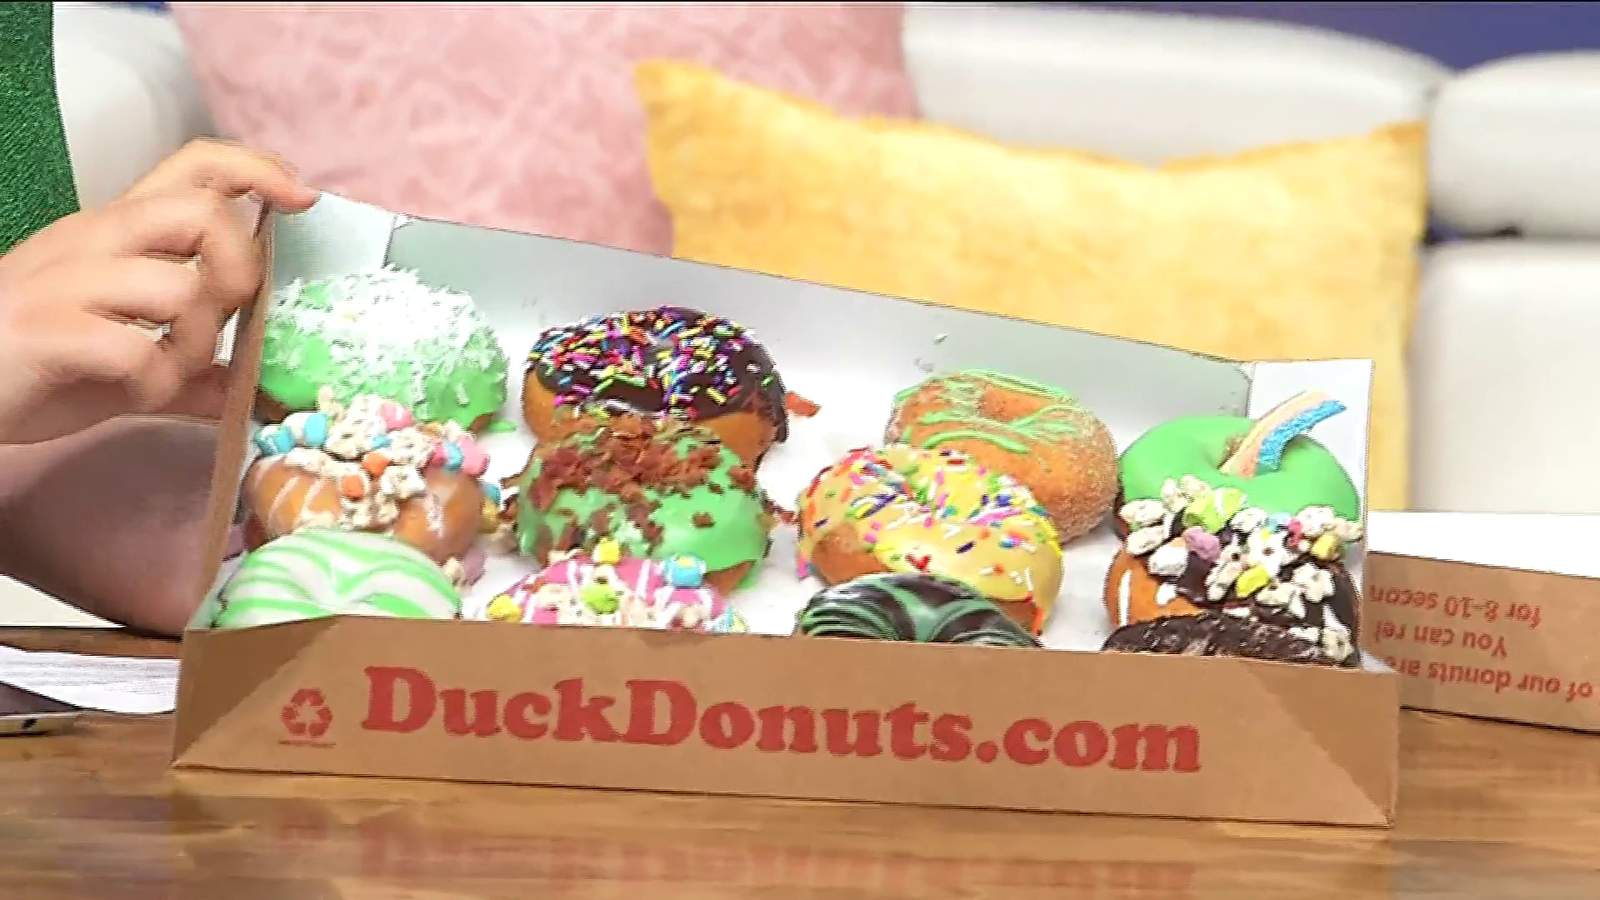 Check out this St. Paddy’s Day assortment from Duck Donuts